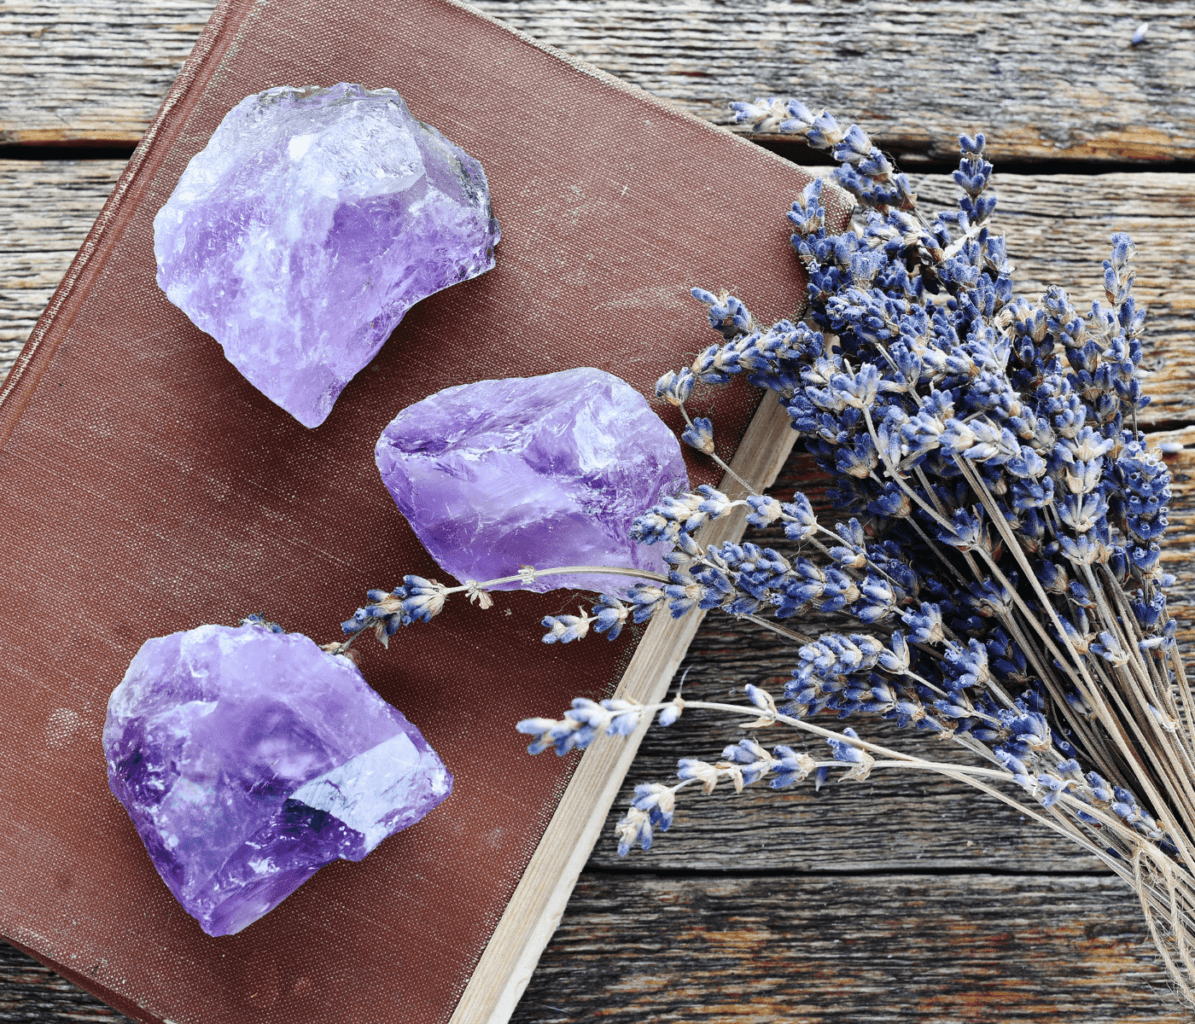 Amethyst Crystals with Lavender for Crystal Therapy and Relaxation